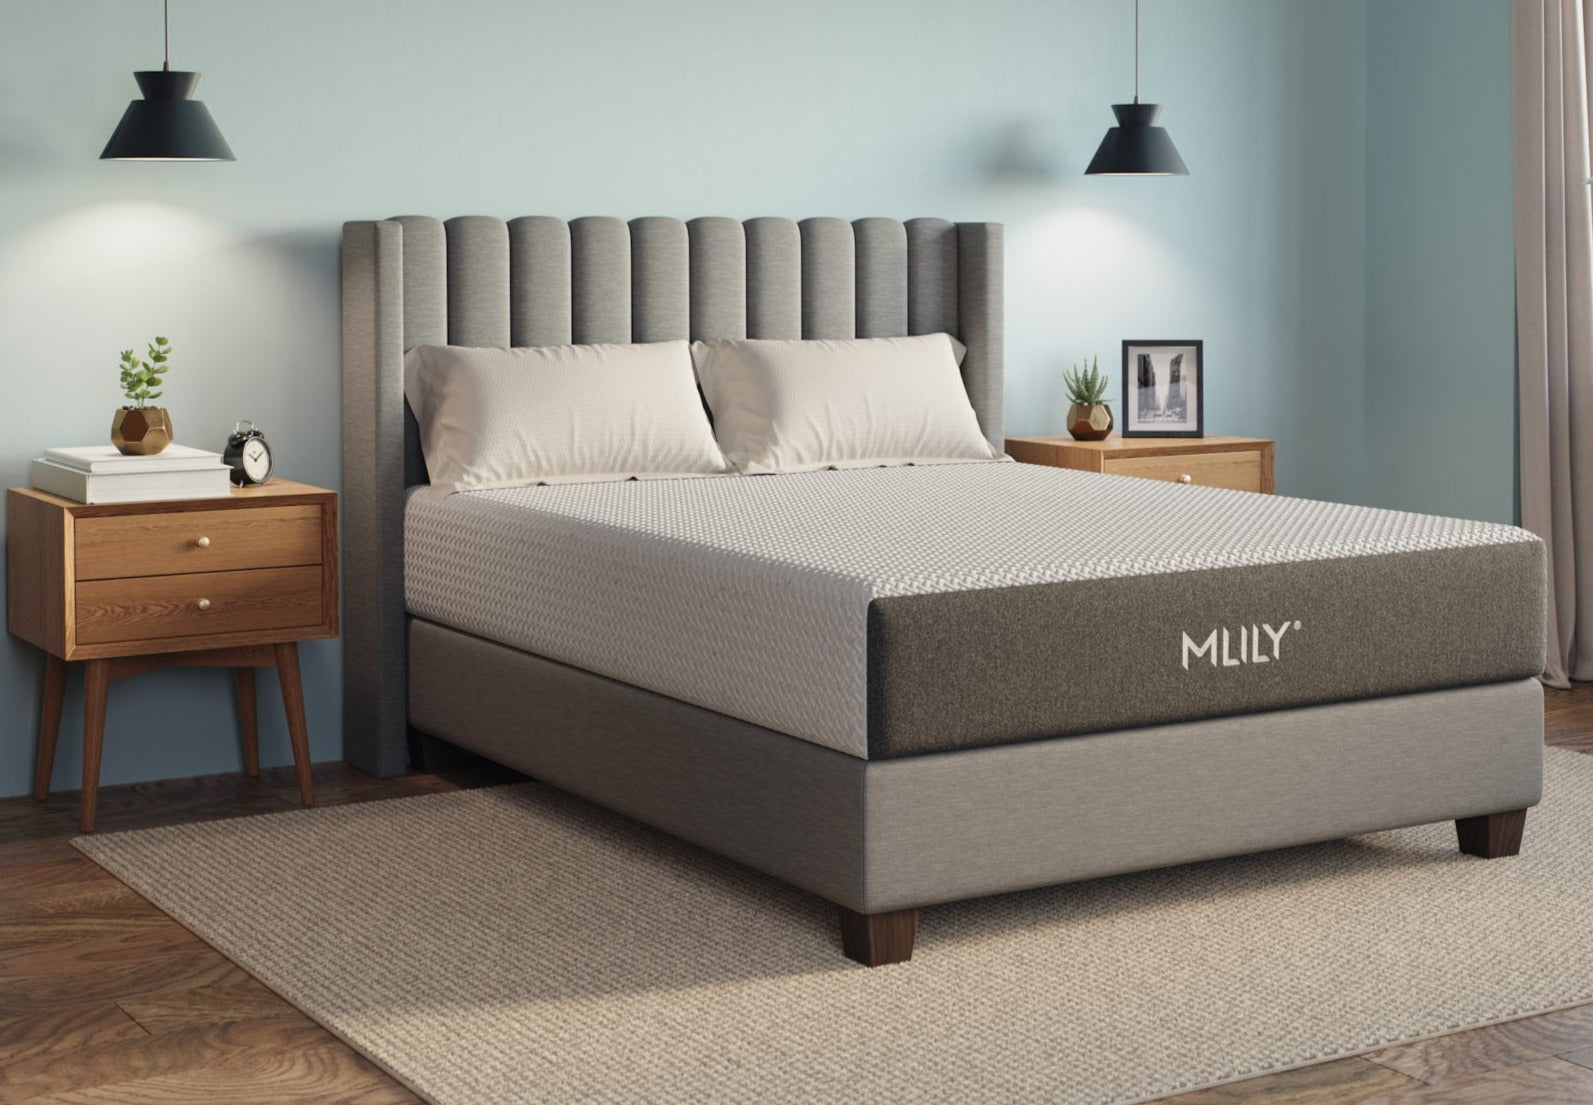 MLILY Fusion Orthopedic Hybrid Mattress - Luxurious Beds and Linens